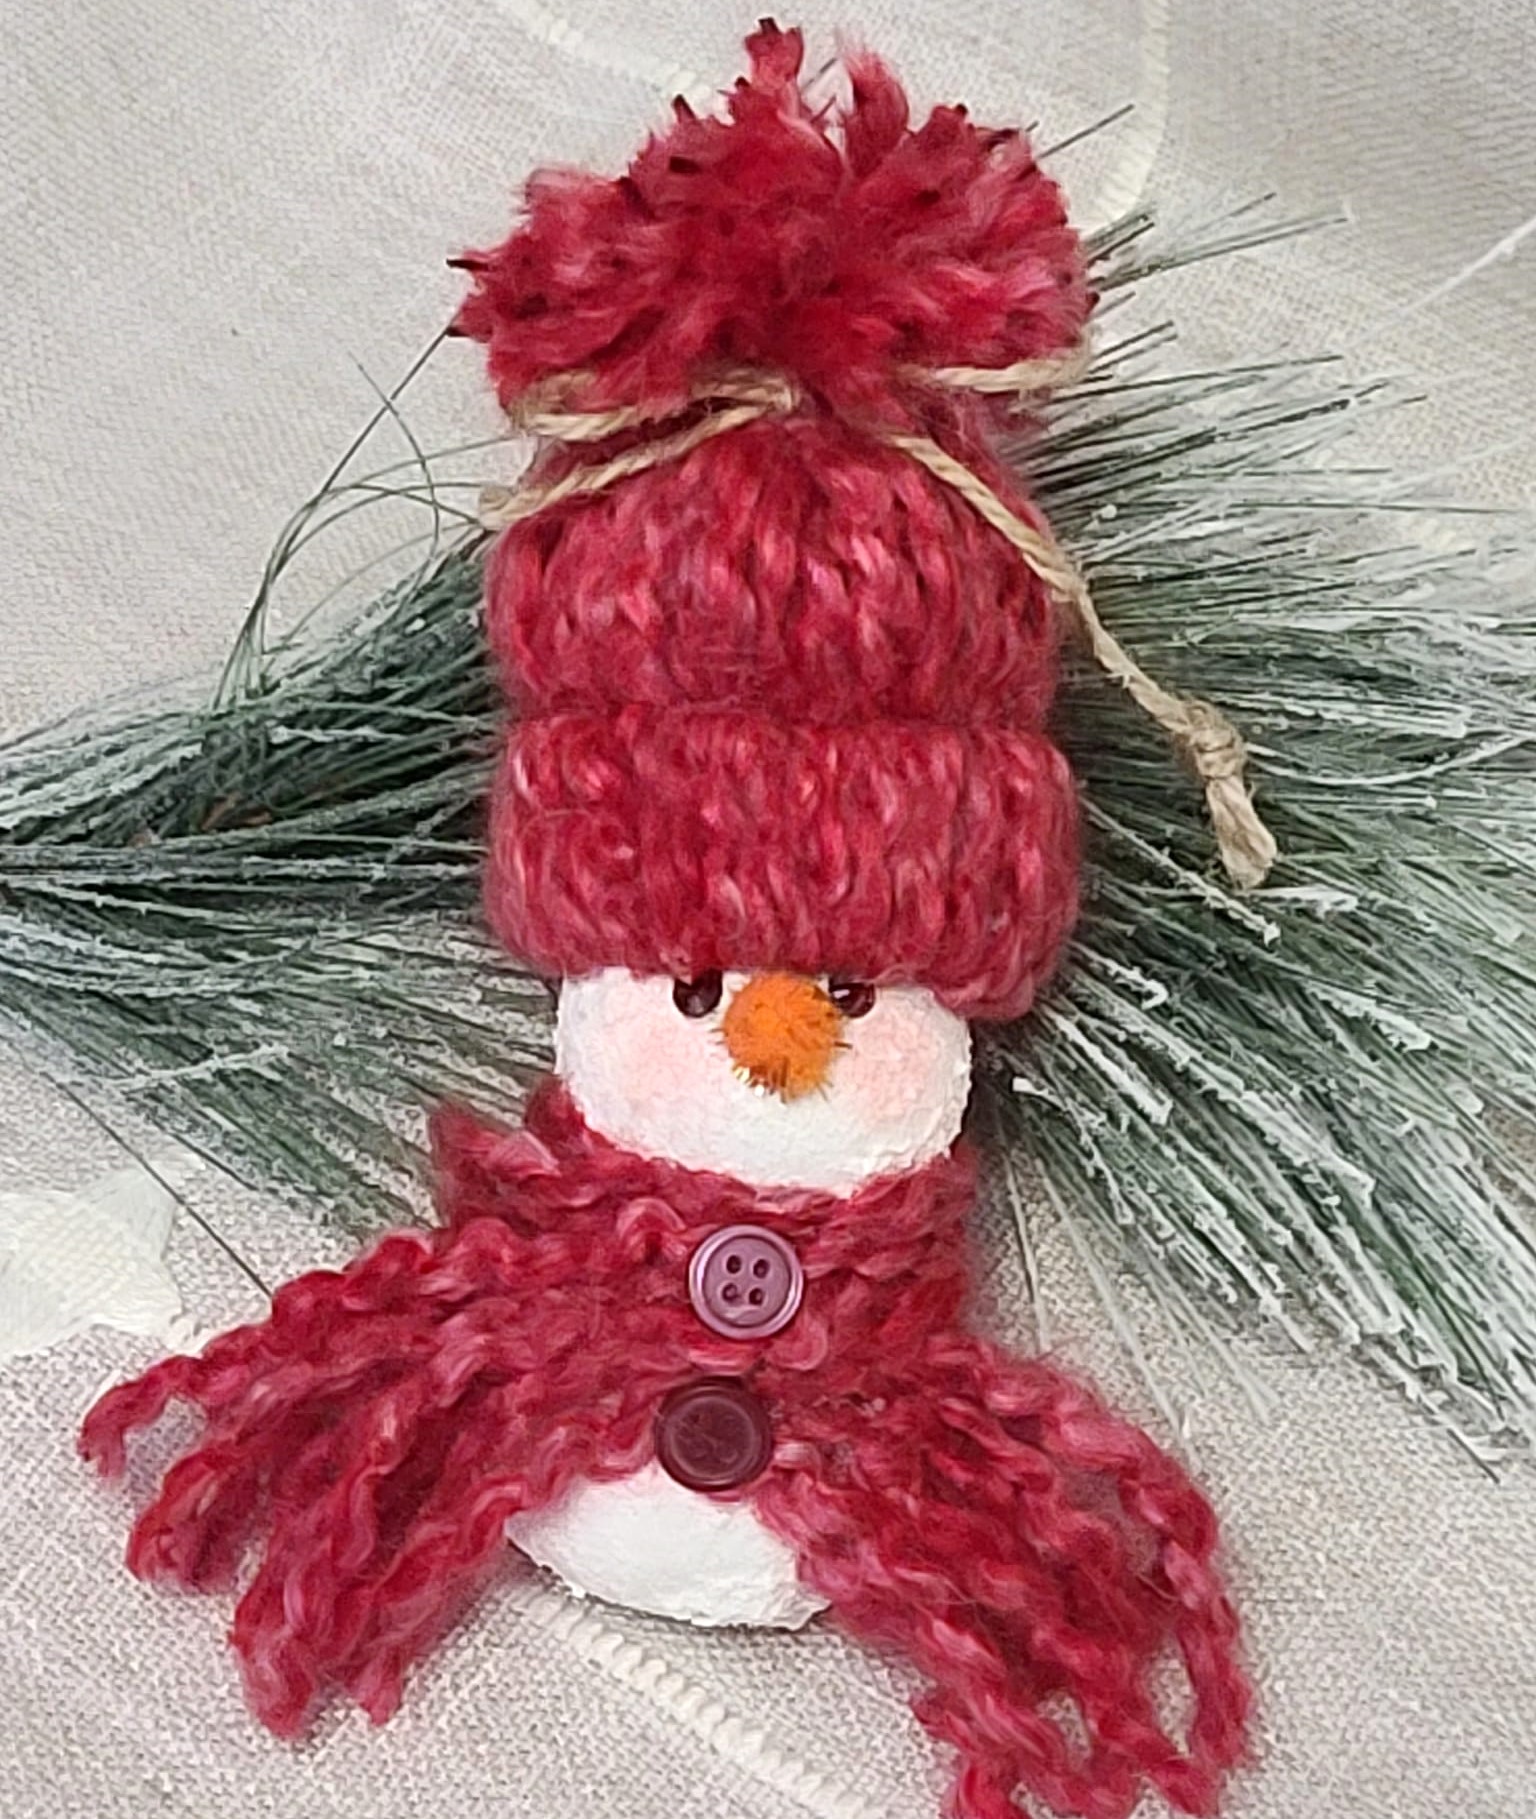 Handpainted gourd snowman ornament with knit hat -multi rose red